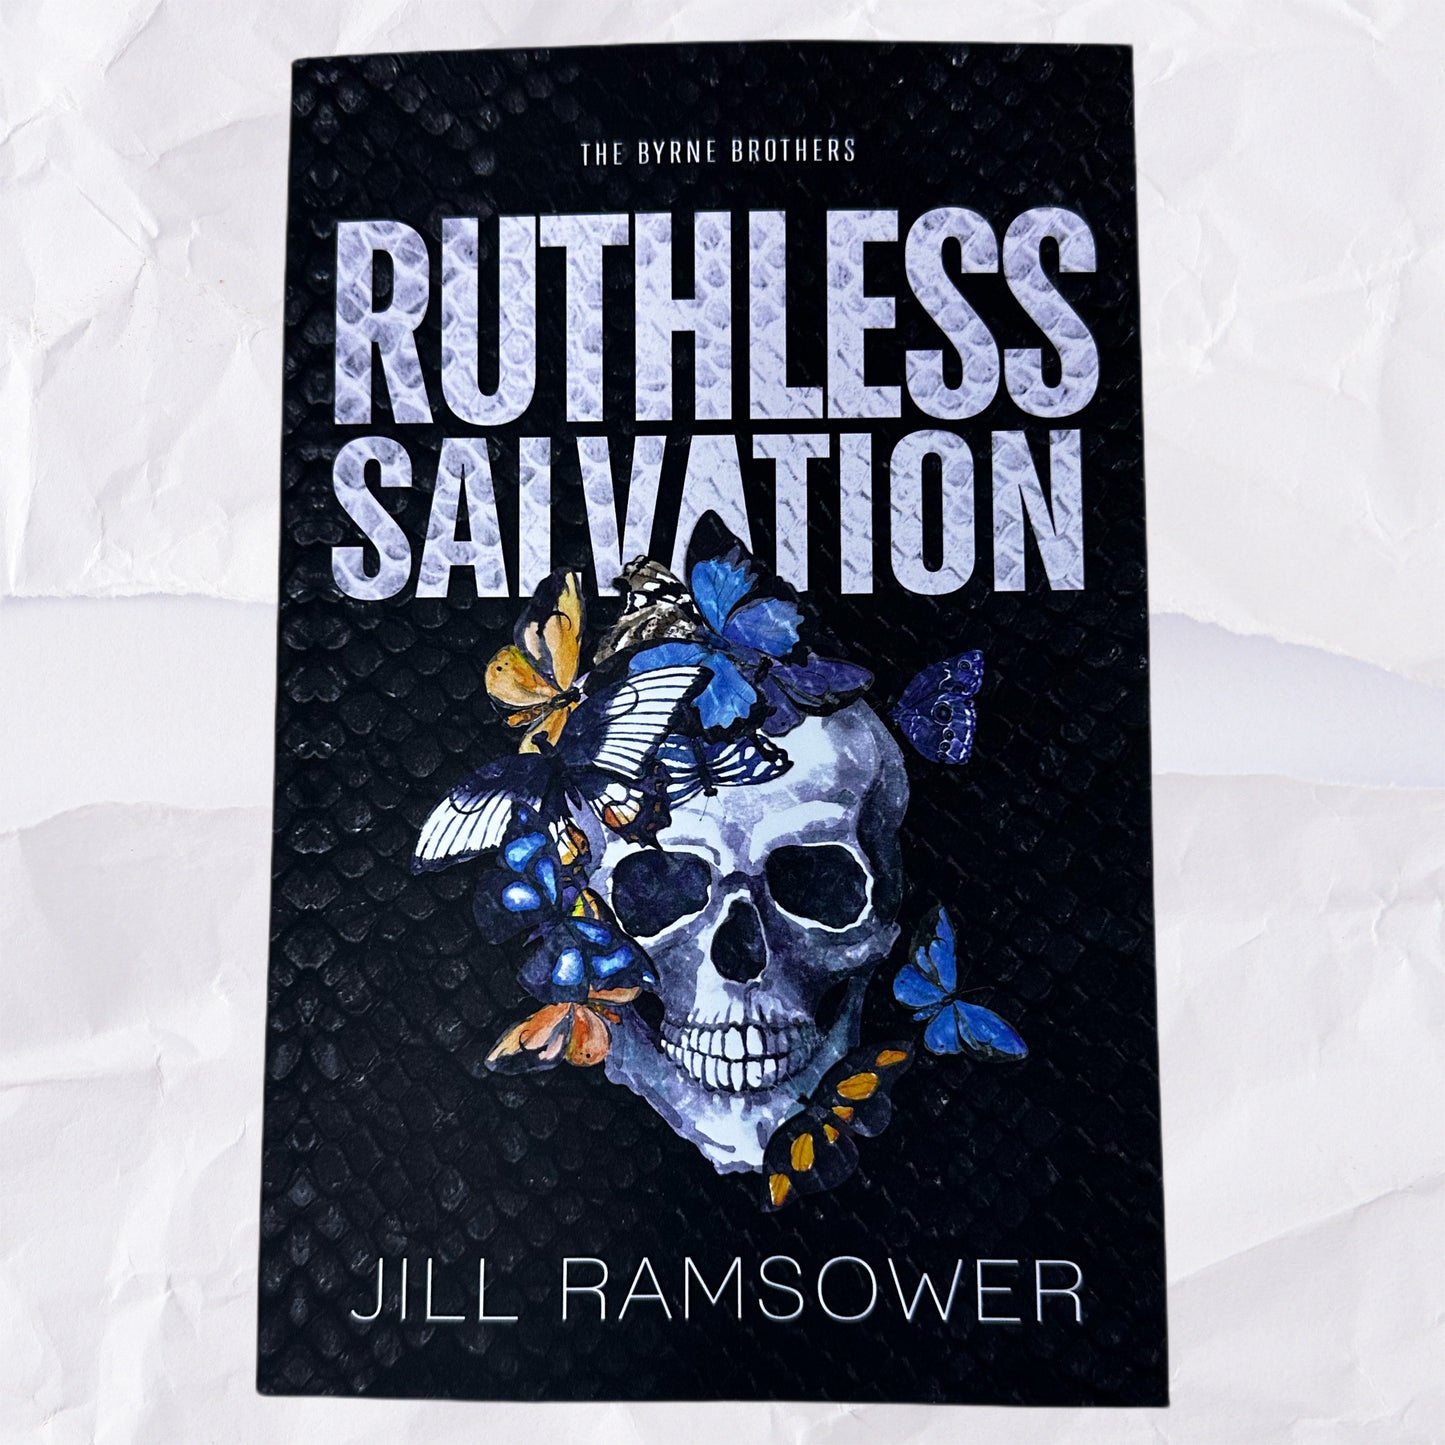 Ruthless Salvation (The Byrne Brothers #3) by Jill Ramsower